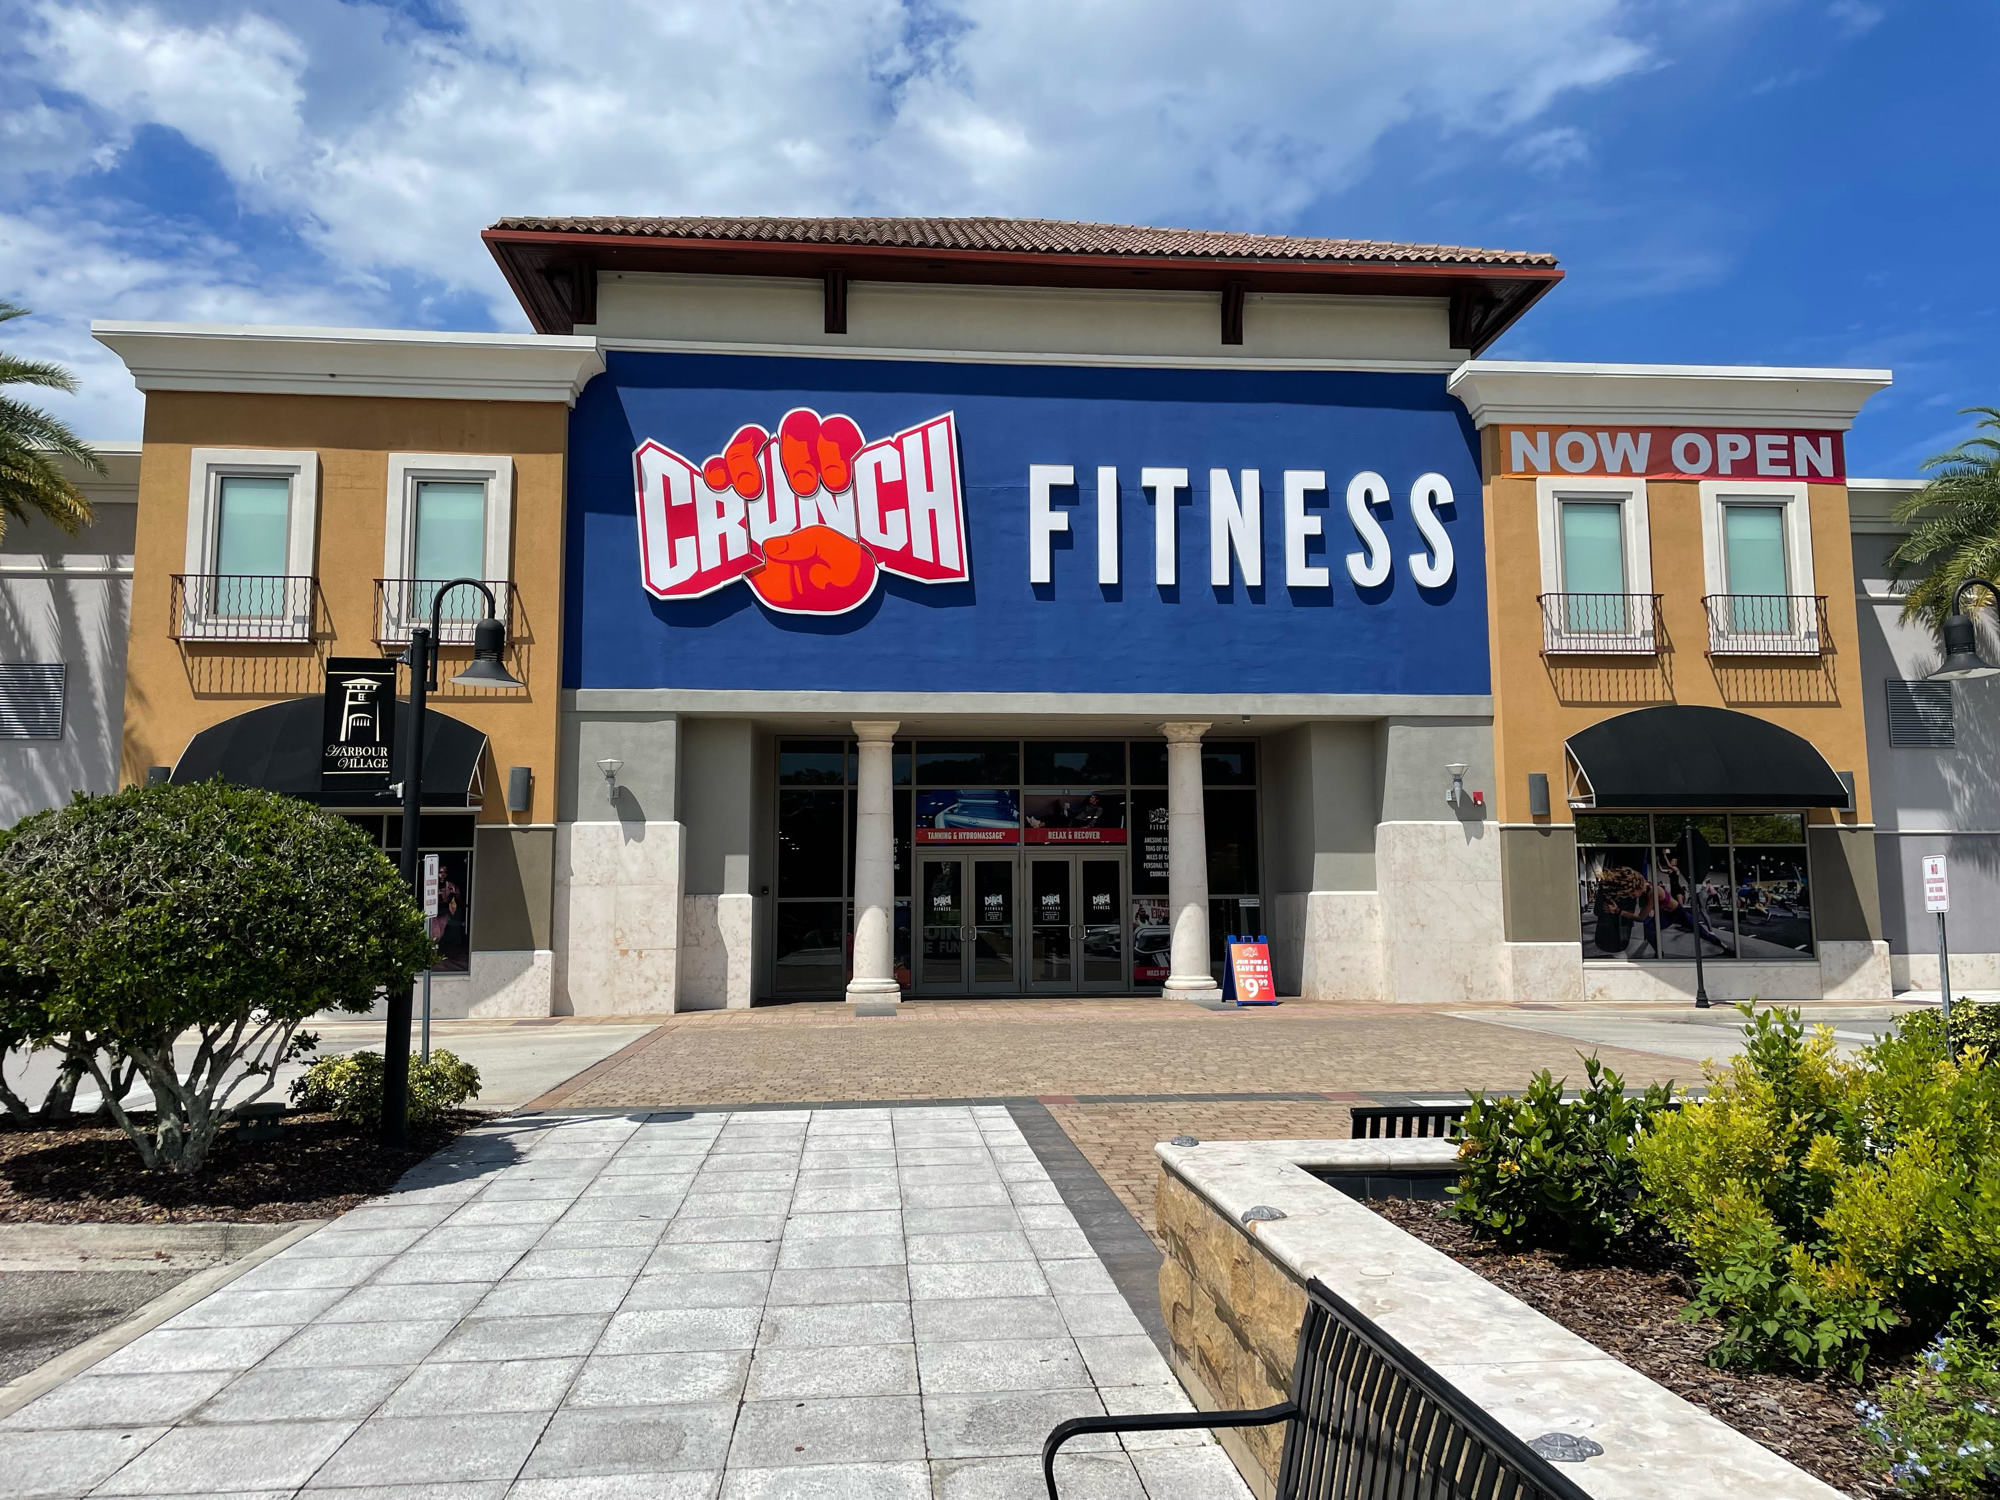 Crunch Fitness is at 13475 Atlantic Blvd. in the Harbour Village shopping center near Queen’s Harbour.